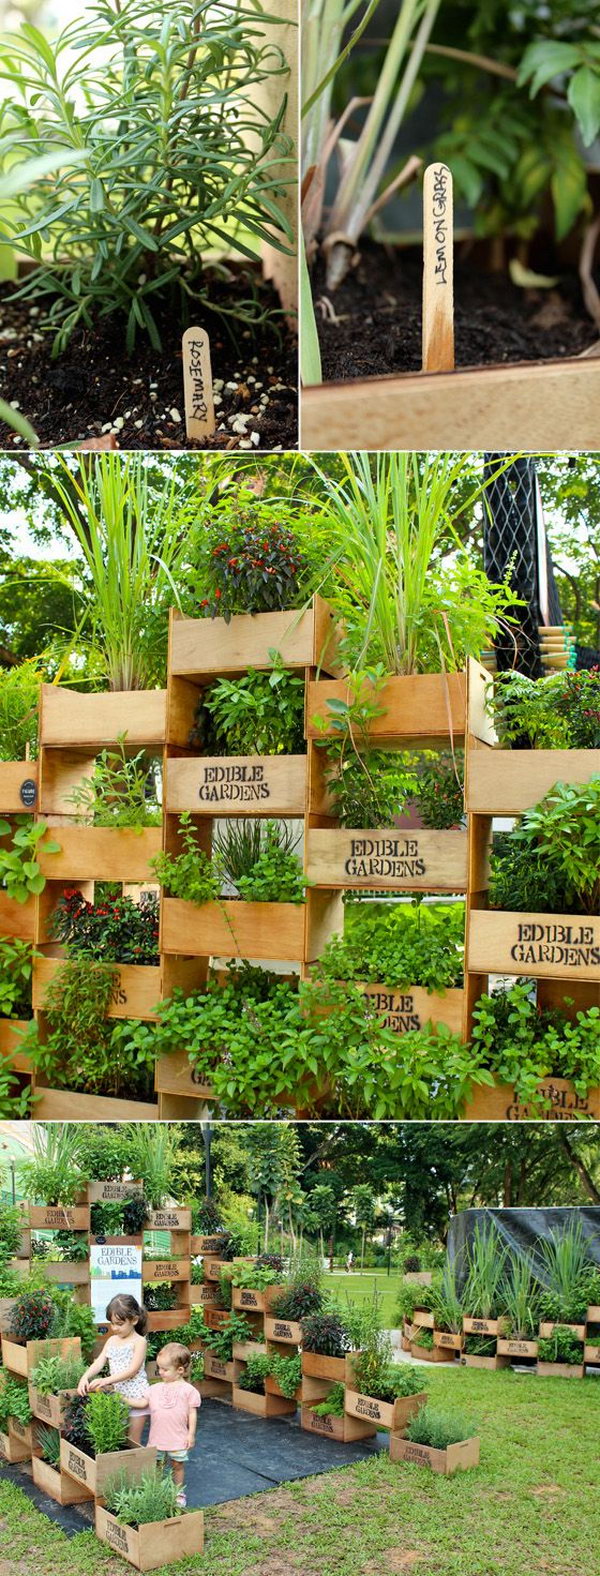 Vertical garden made of old boxes. It allows plants to extend upwards instead of growing along the surface of the garden. Doesn't take up much space and looks so beautiful at the same time.